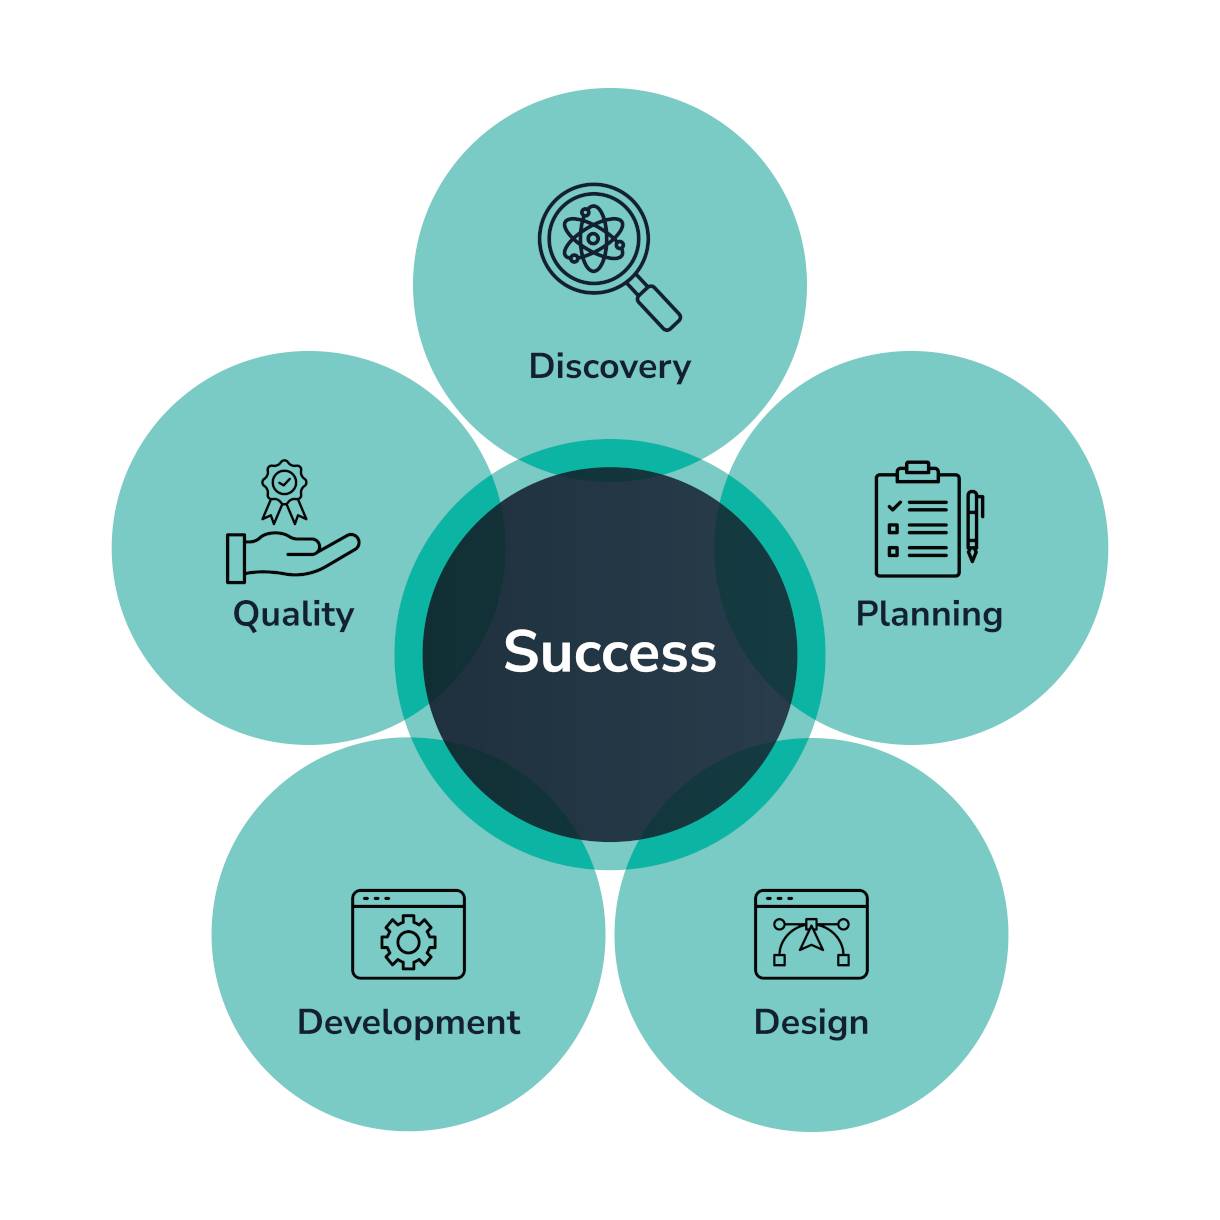 the five key factors to successful website design are discovery, planning, design, development, and quality